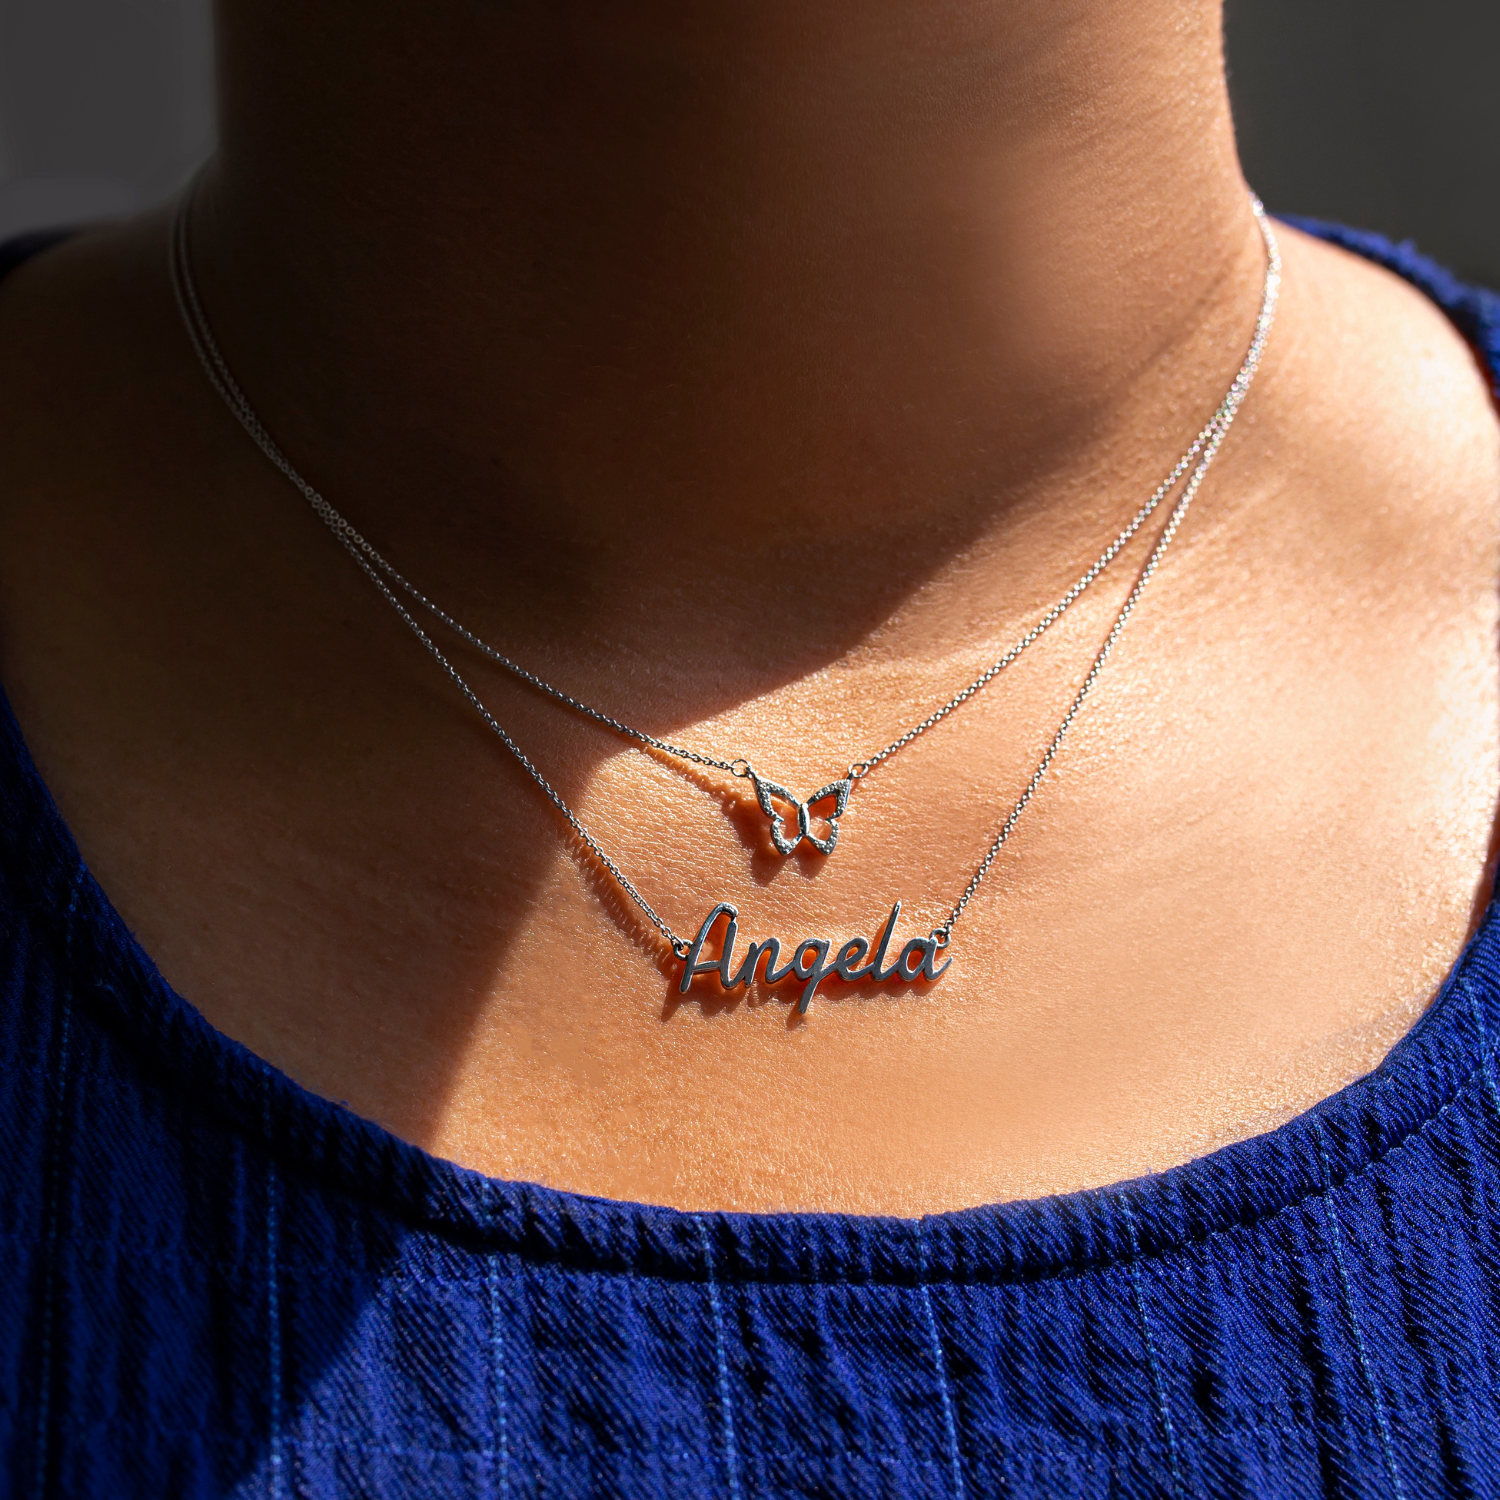 Custom Name Necklace With Angela Name